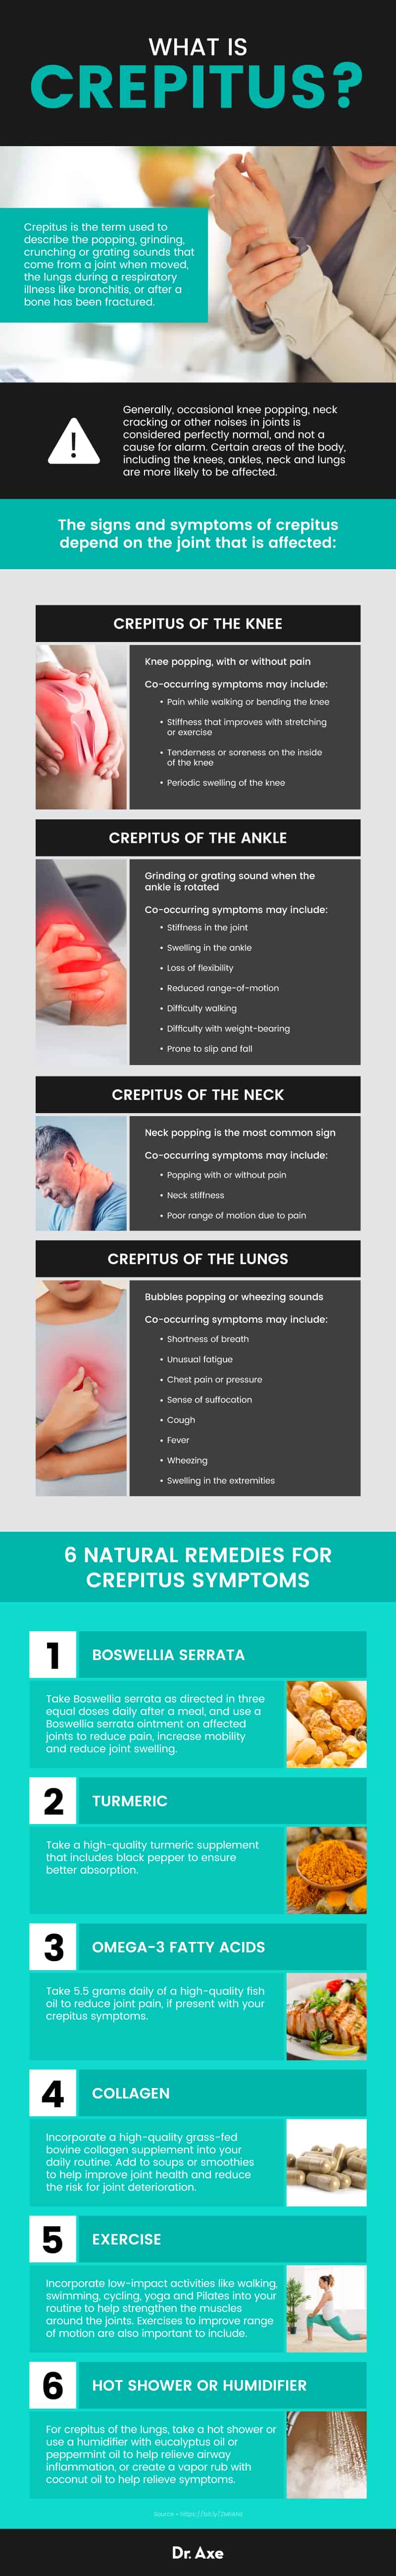 Crepitus symptoms and natural treatment - Dr. Axe